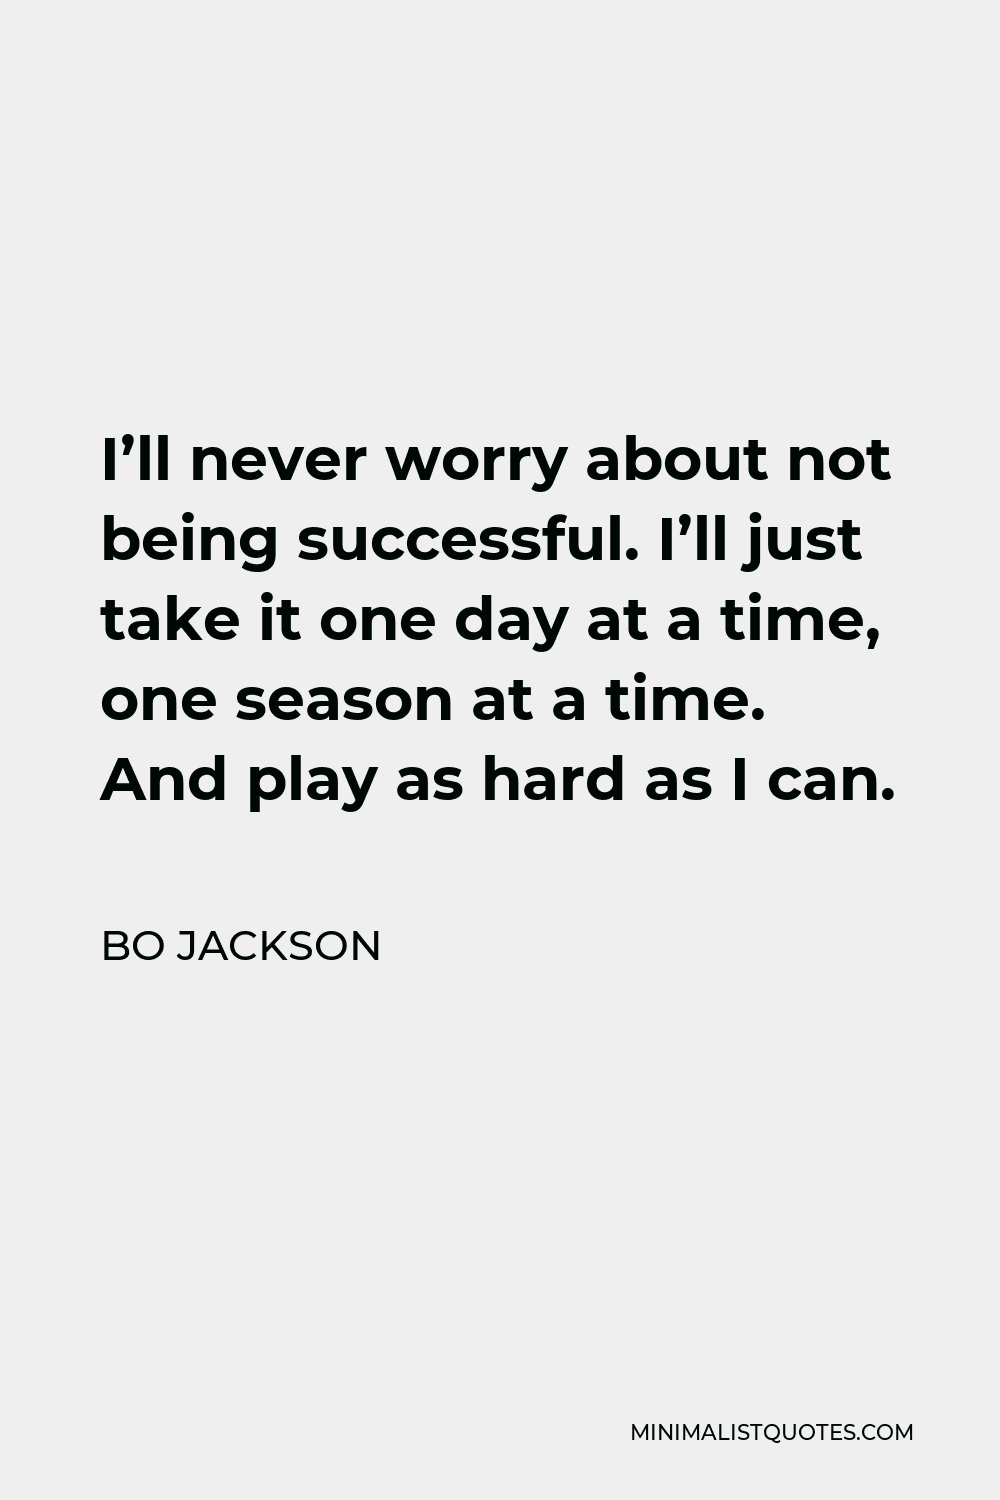 Bo Jackson Quote - I’ll never worry about not being successful. I’ll just take it one day at a time, one season at a time. And play as hard as I can.